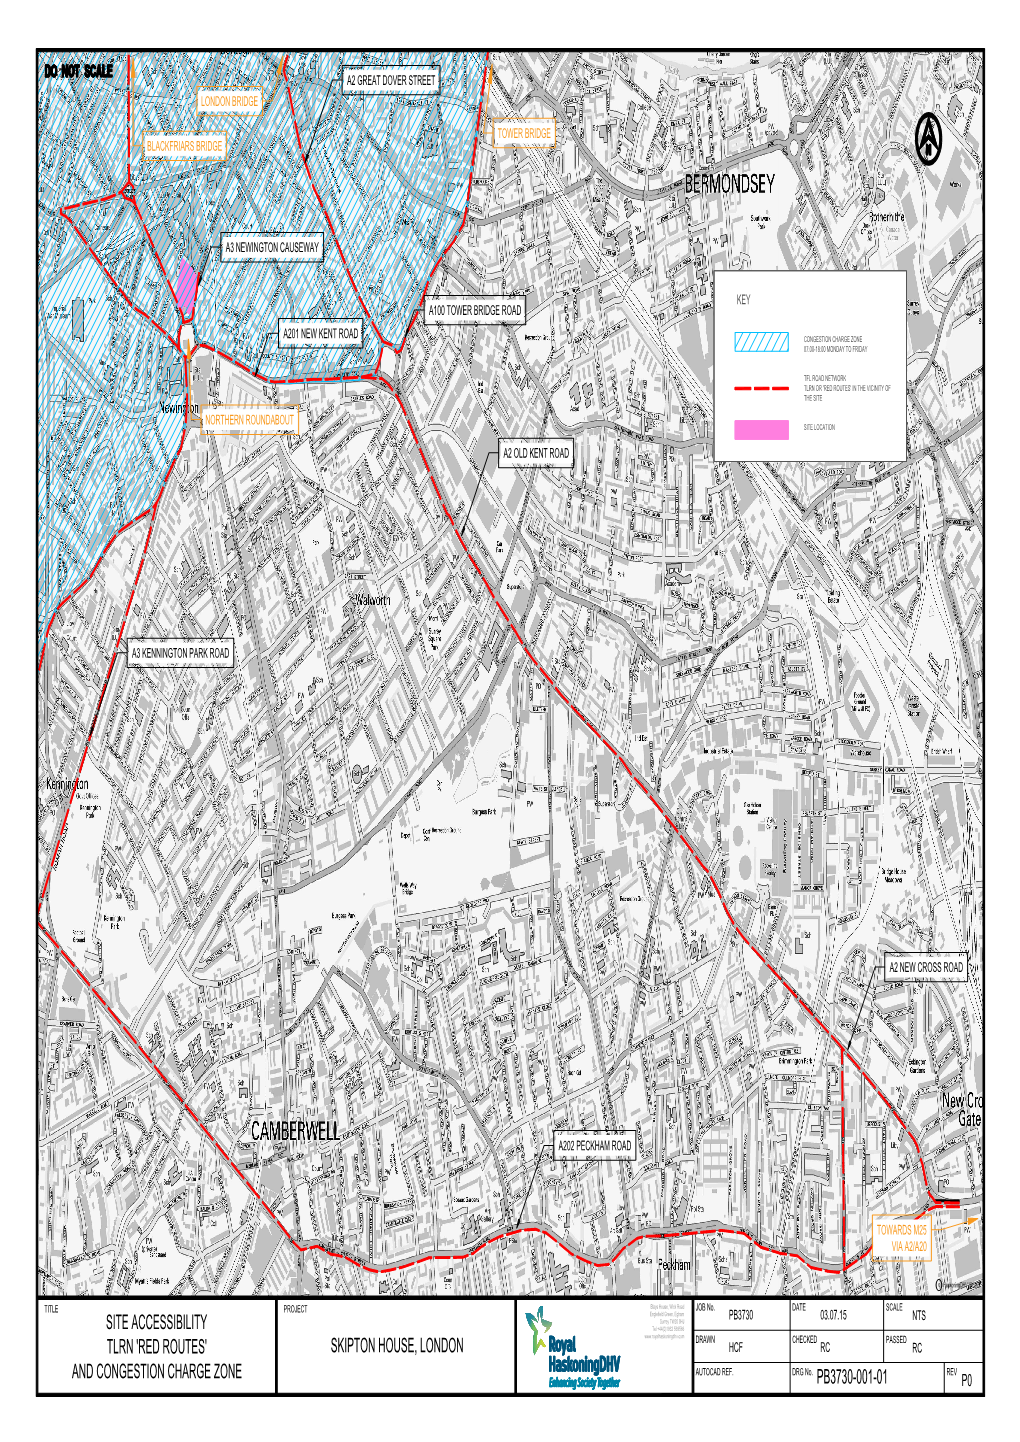 Site Accessibility Tlrn 'Red Routes' and Congestion Charge Zone Skipton House, London Pb3730-001-01